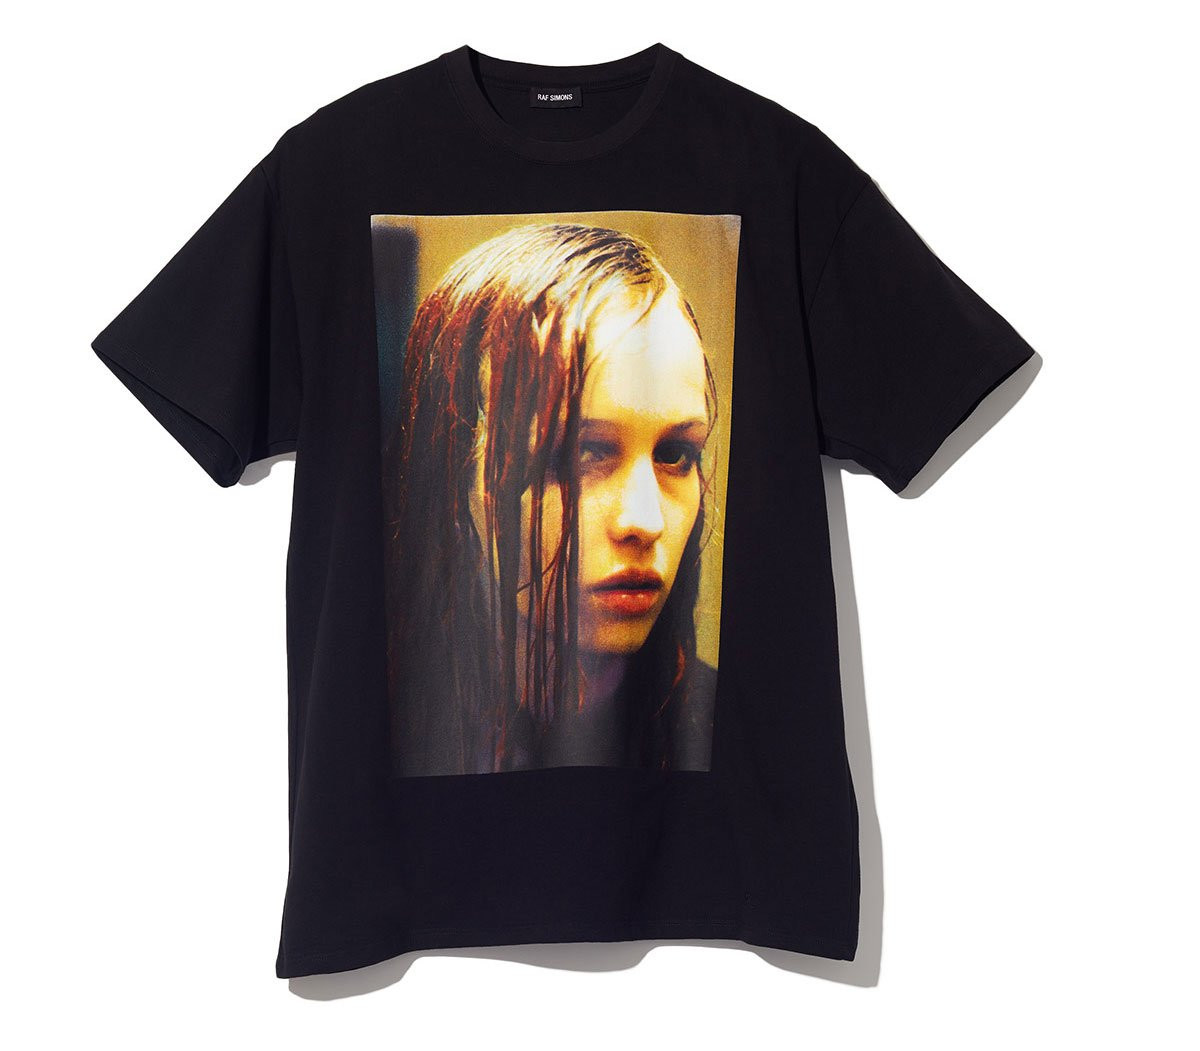 Raf Simons Drops Collaborative AW18 Collection with ‘Christiane F. wir Kinder vom Bahnhof Zoo’